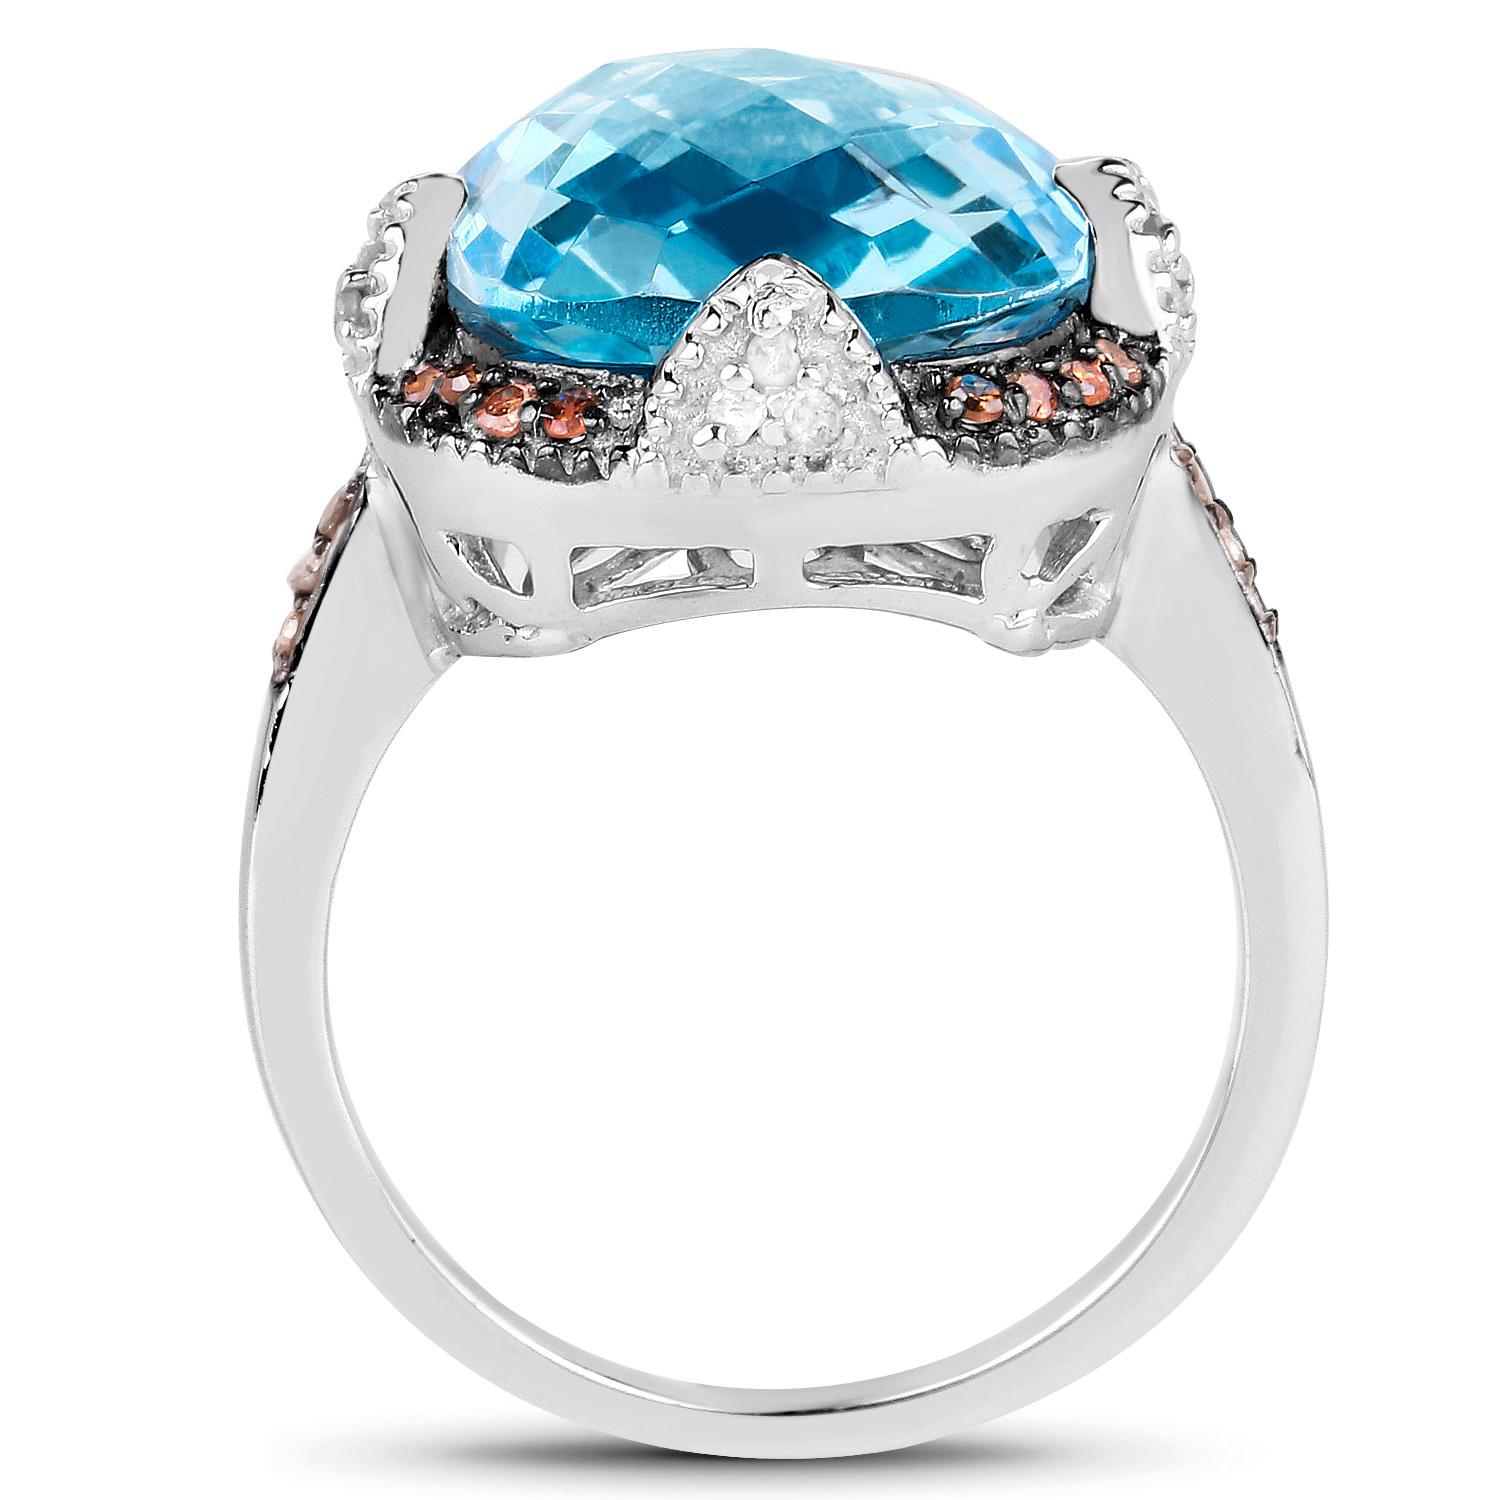 Swiss Blue Topaz Cocktail Ring With Diamonds 8.37 Carats In Excellent Condition For Sale In Laguna Niguel, CA